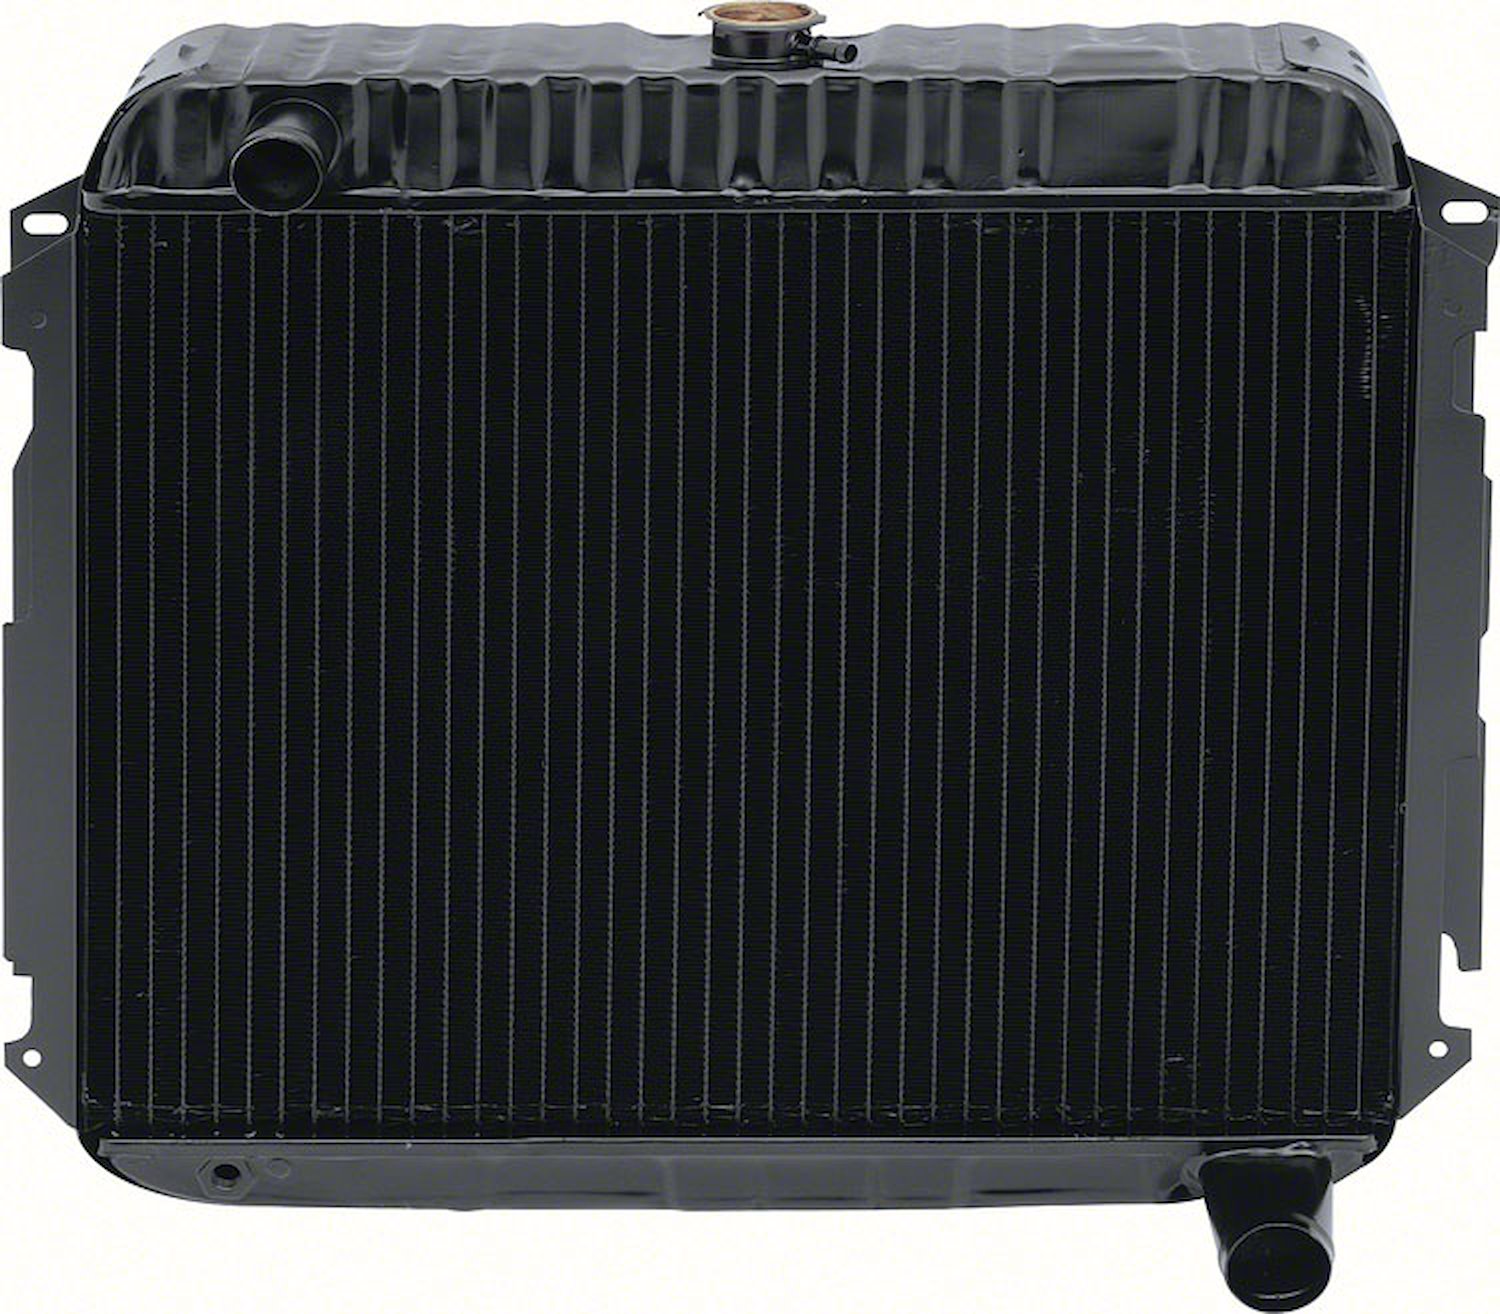 MD2286S Replacement Radiator 1971-73 Plymouth B-Body, 71-72 E-Body 6 Cyl 196/225 With Standard Trans 3 Row